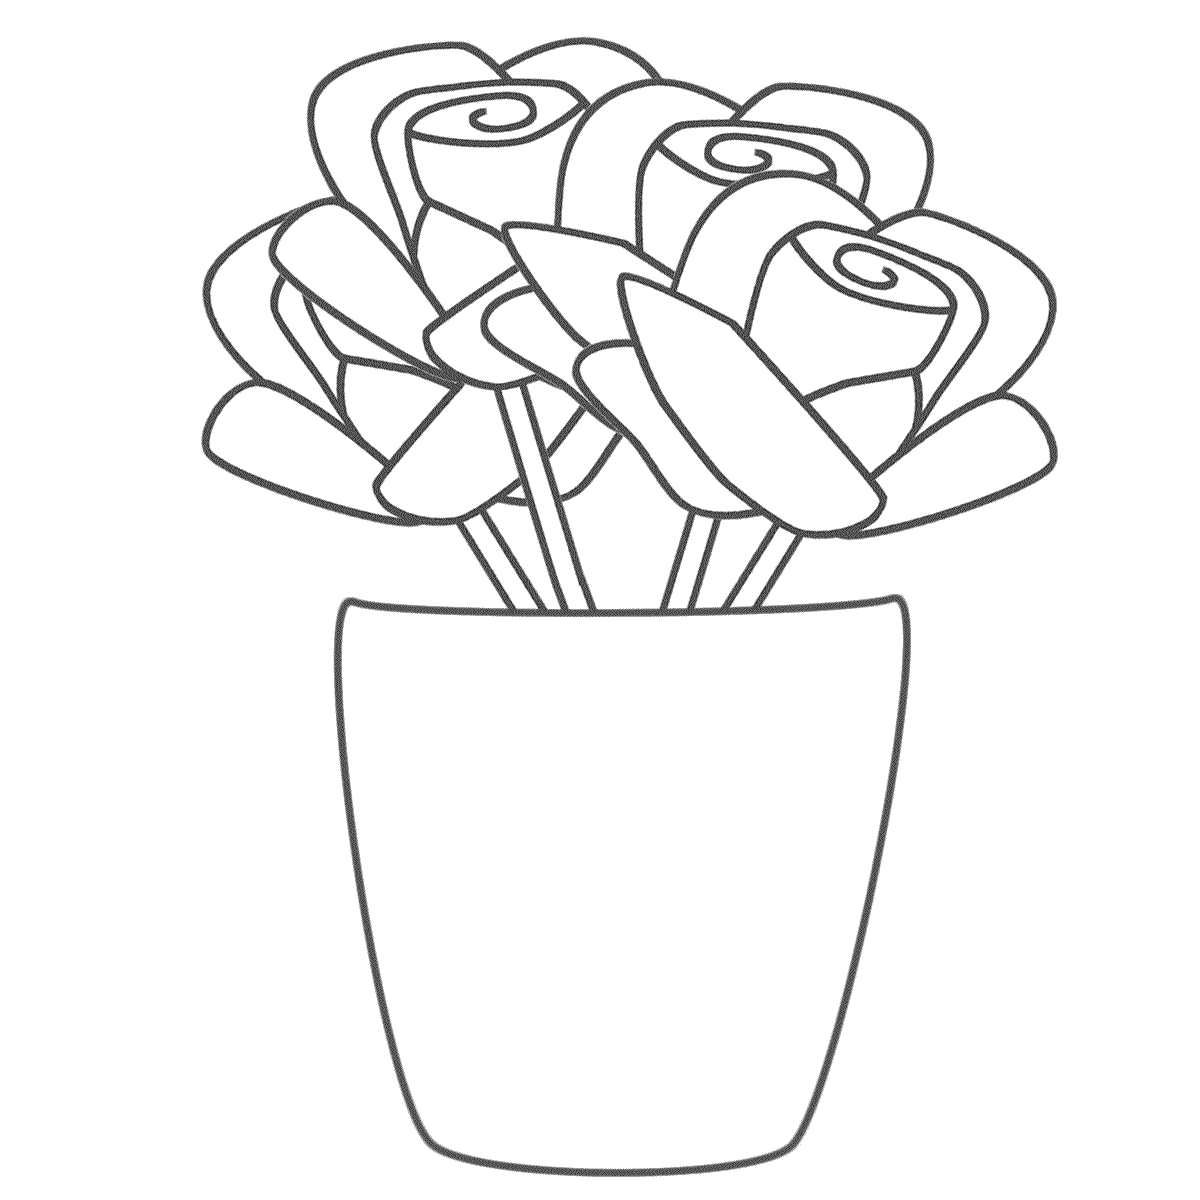 Free Vase And Flowers Coloring Page, Download Free Vase And Flowers